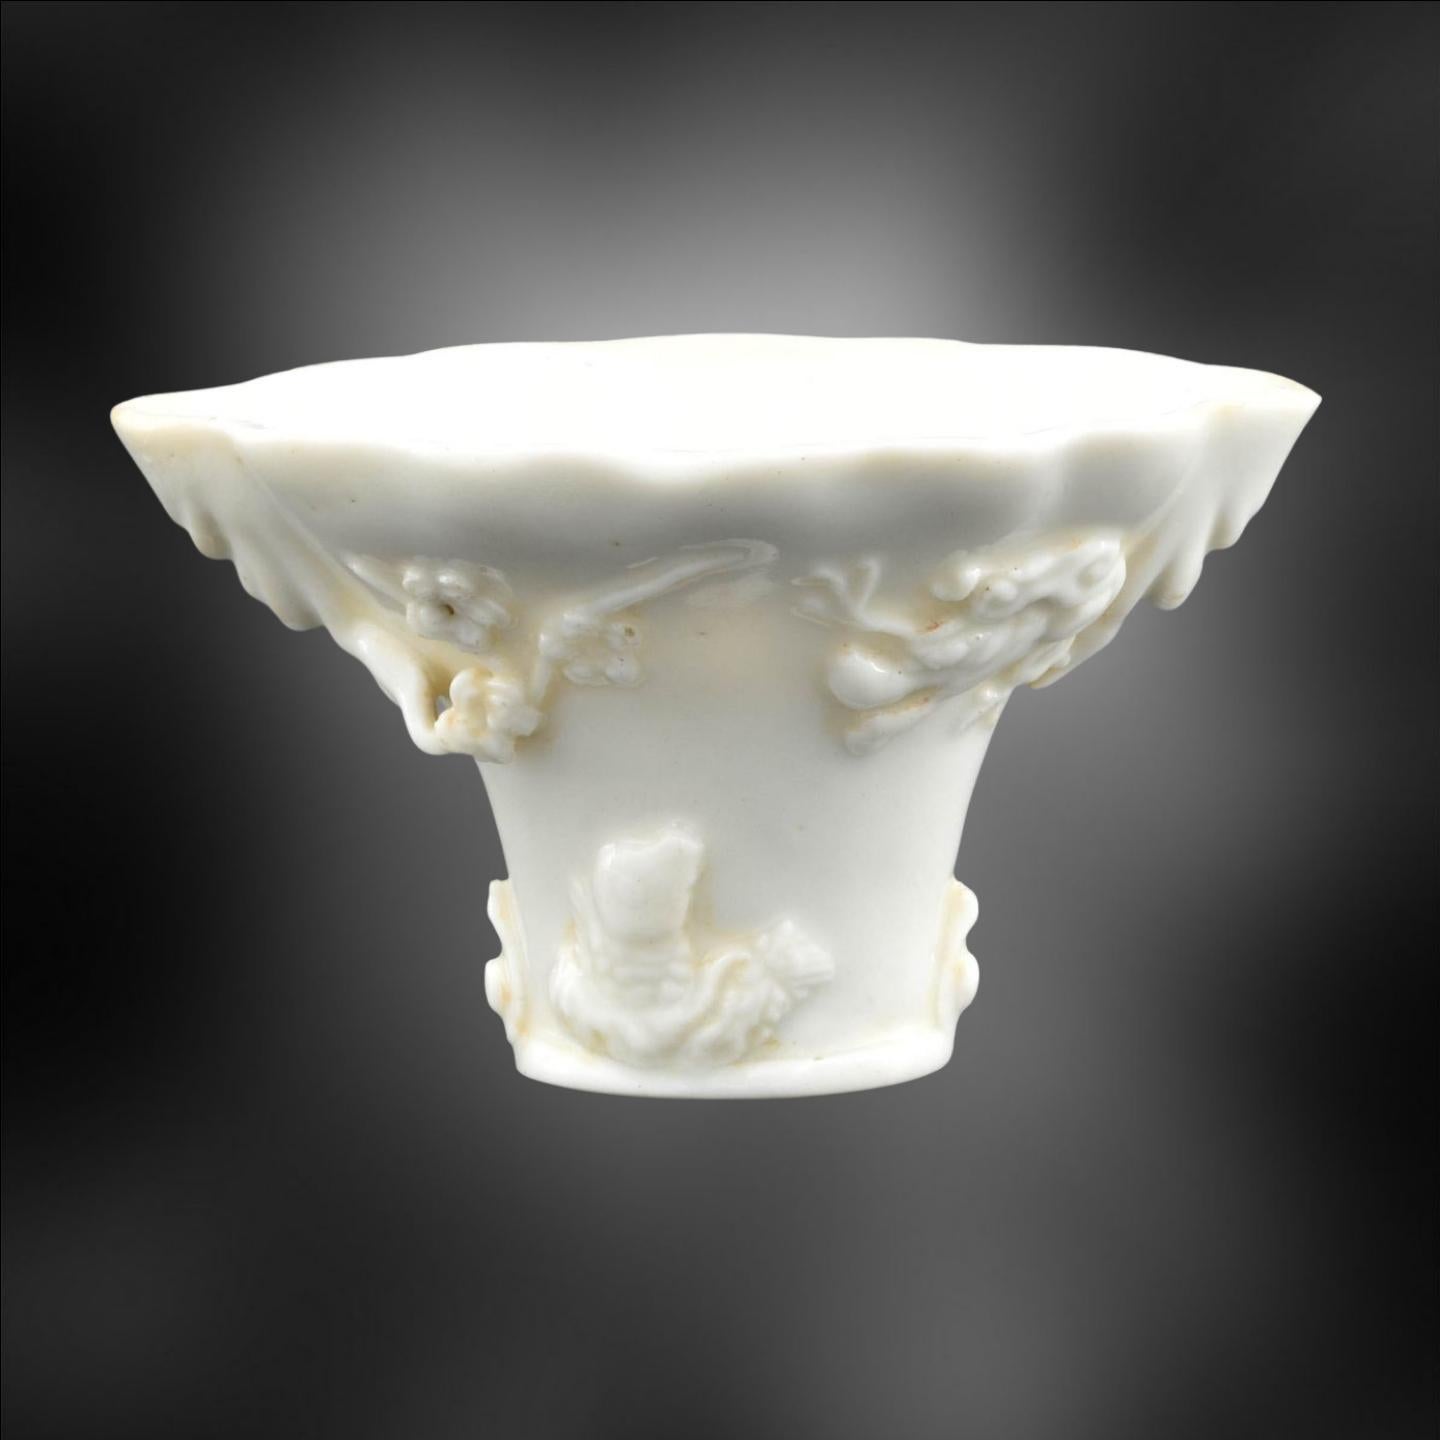 Blanc de Chine cup of a shape copying earlier cups which were carved from 16th century rhinoceros horns. 

Lucious Dehua porcelain, moulded and heavily sprigged with plum blossom, deer, phoenix, fish and dragons.

An attractive piece of moderate